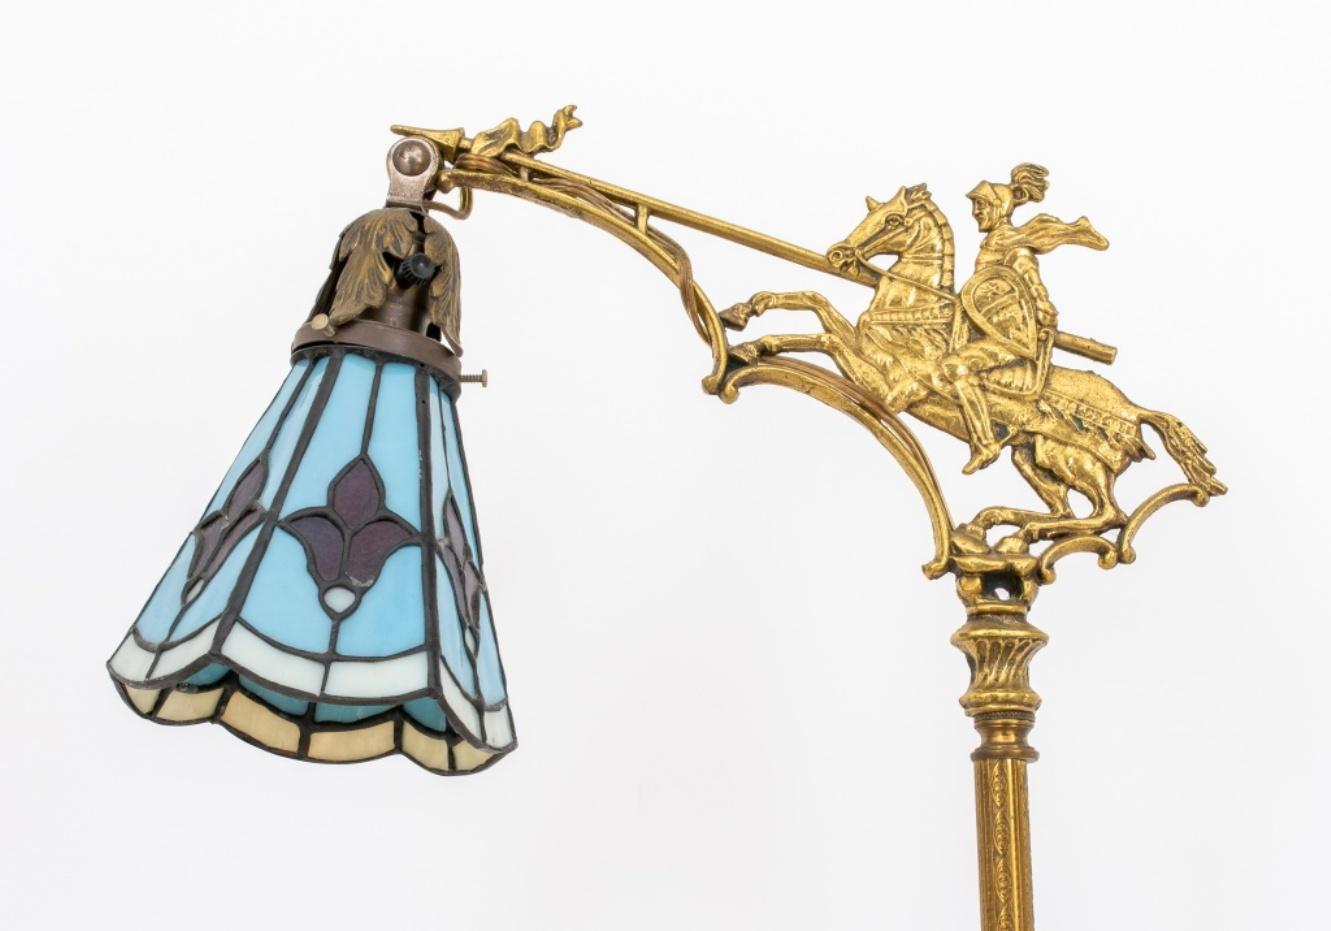 American Brass and Stained Glass floor lamp, 1910s-1920s, the brass column support with onyx spacers and base, the top with a figure of St. George and the Dragon as an angle to support the stained glass trumpet form shade. Measures: 61